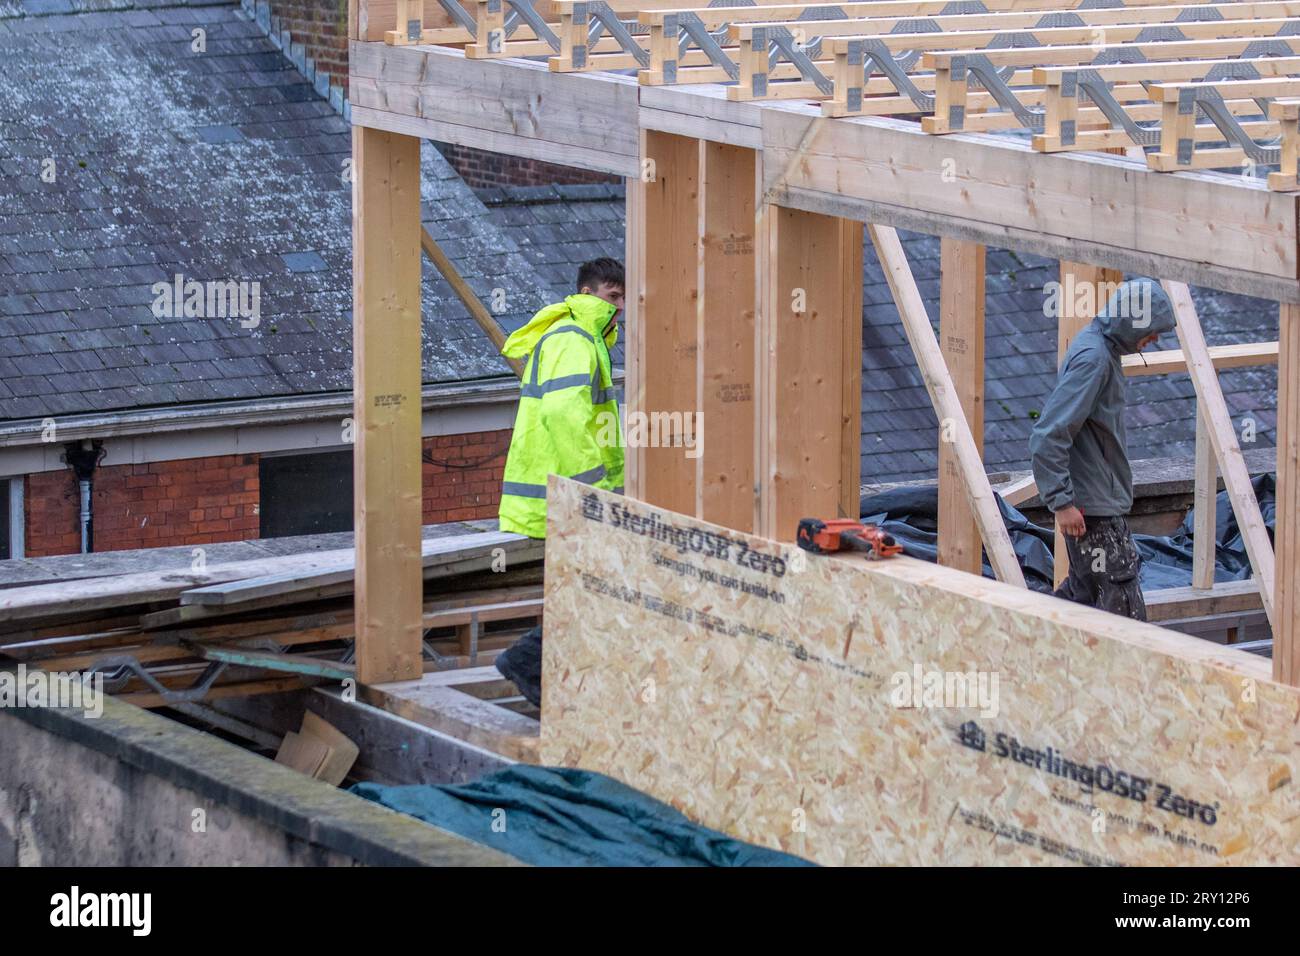 Extraordinary timber roof extension underway on city centre building in Preston. The elevation uses waterproof SterlingOSB Zero timbers and lattice roof trusses to support an extension. Stock Photo